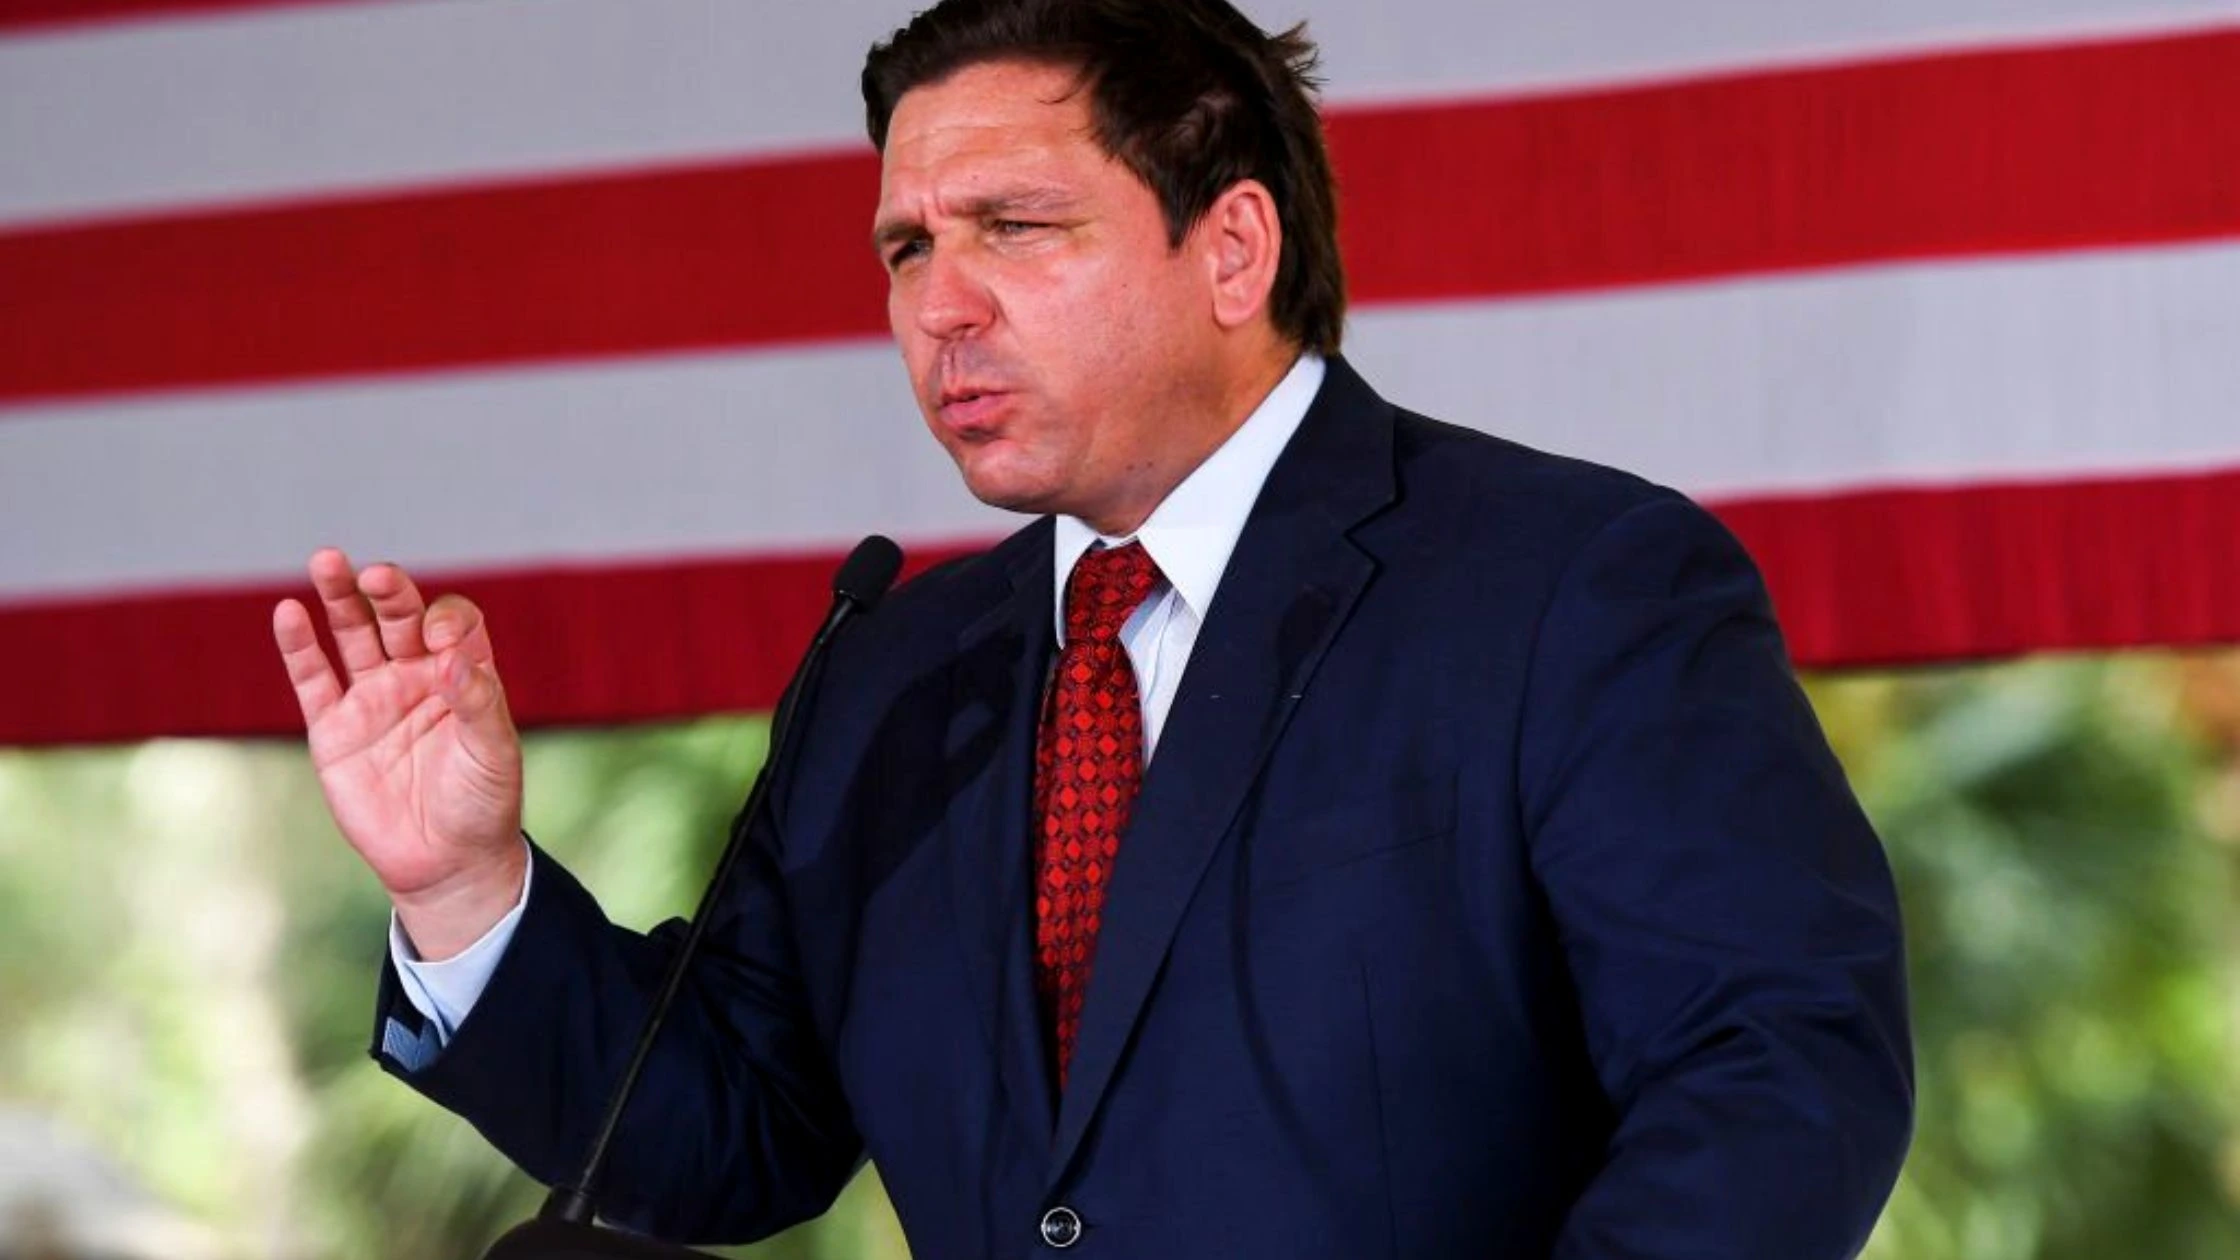 Florida Governor Ron DeSantis Proposes Initiatives To Enact Covid-19 Changes Permanent